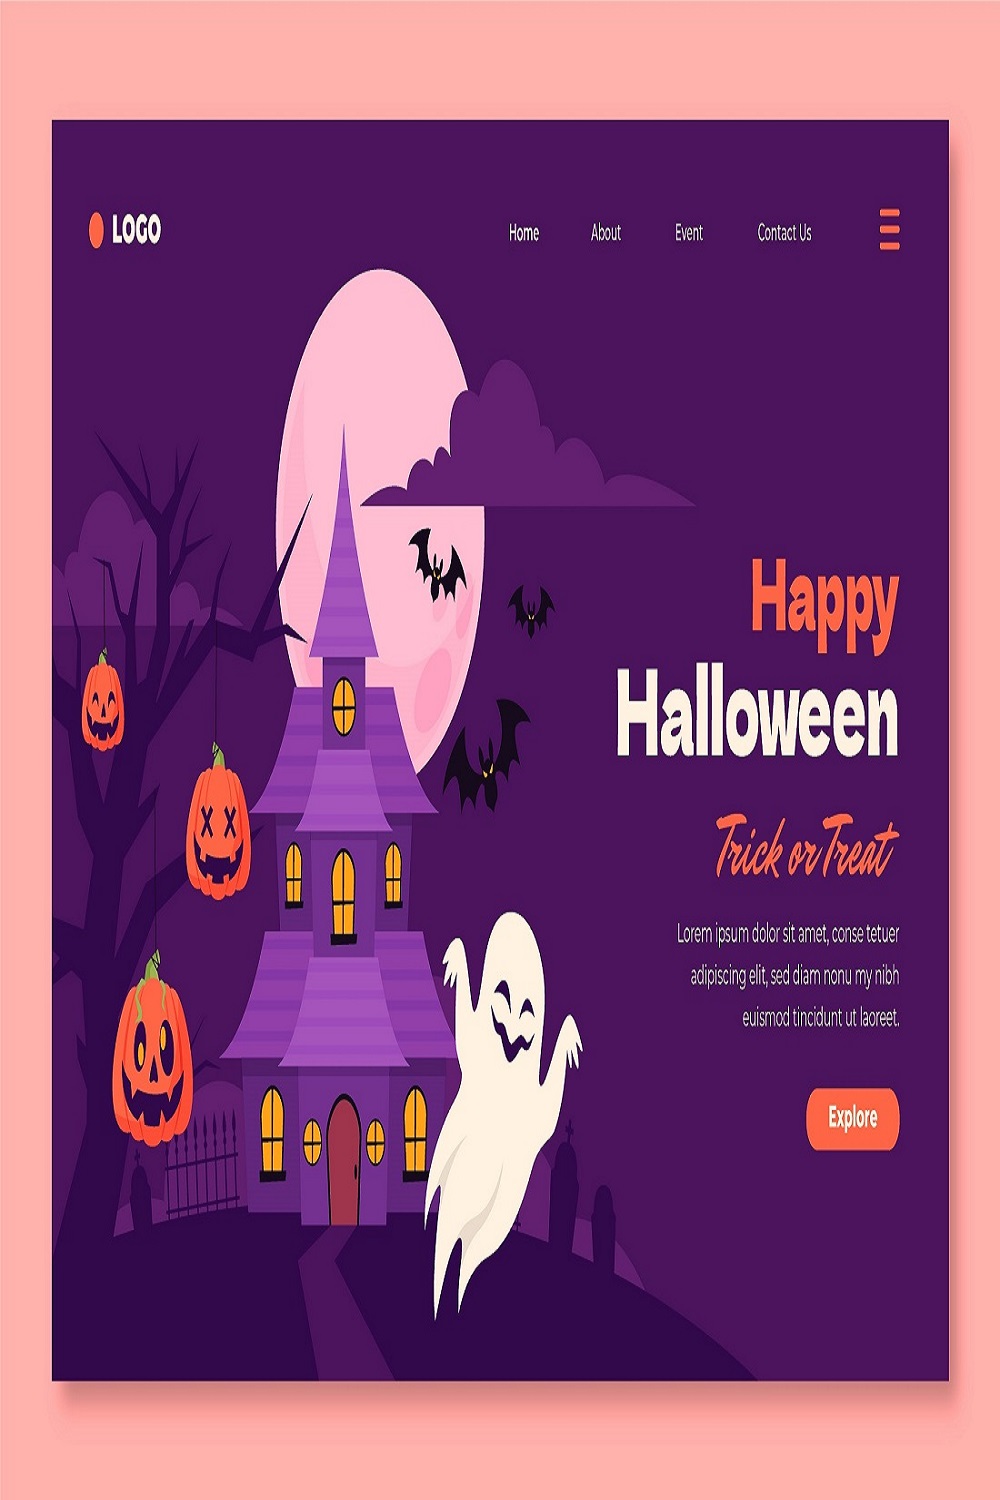 Happy Halloween celebration landing page template pinterest preview image.